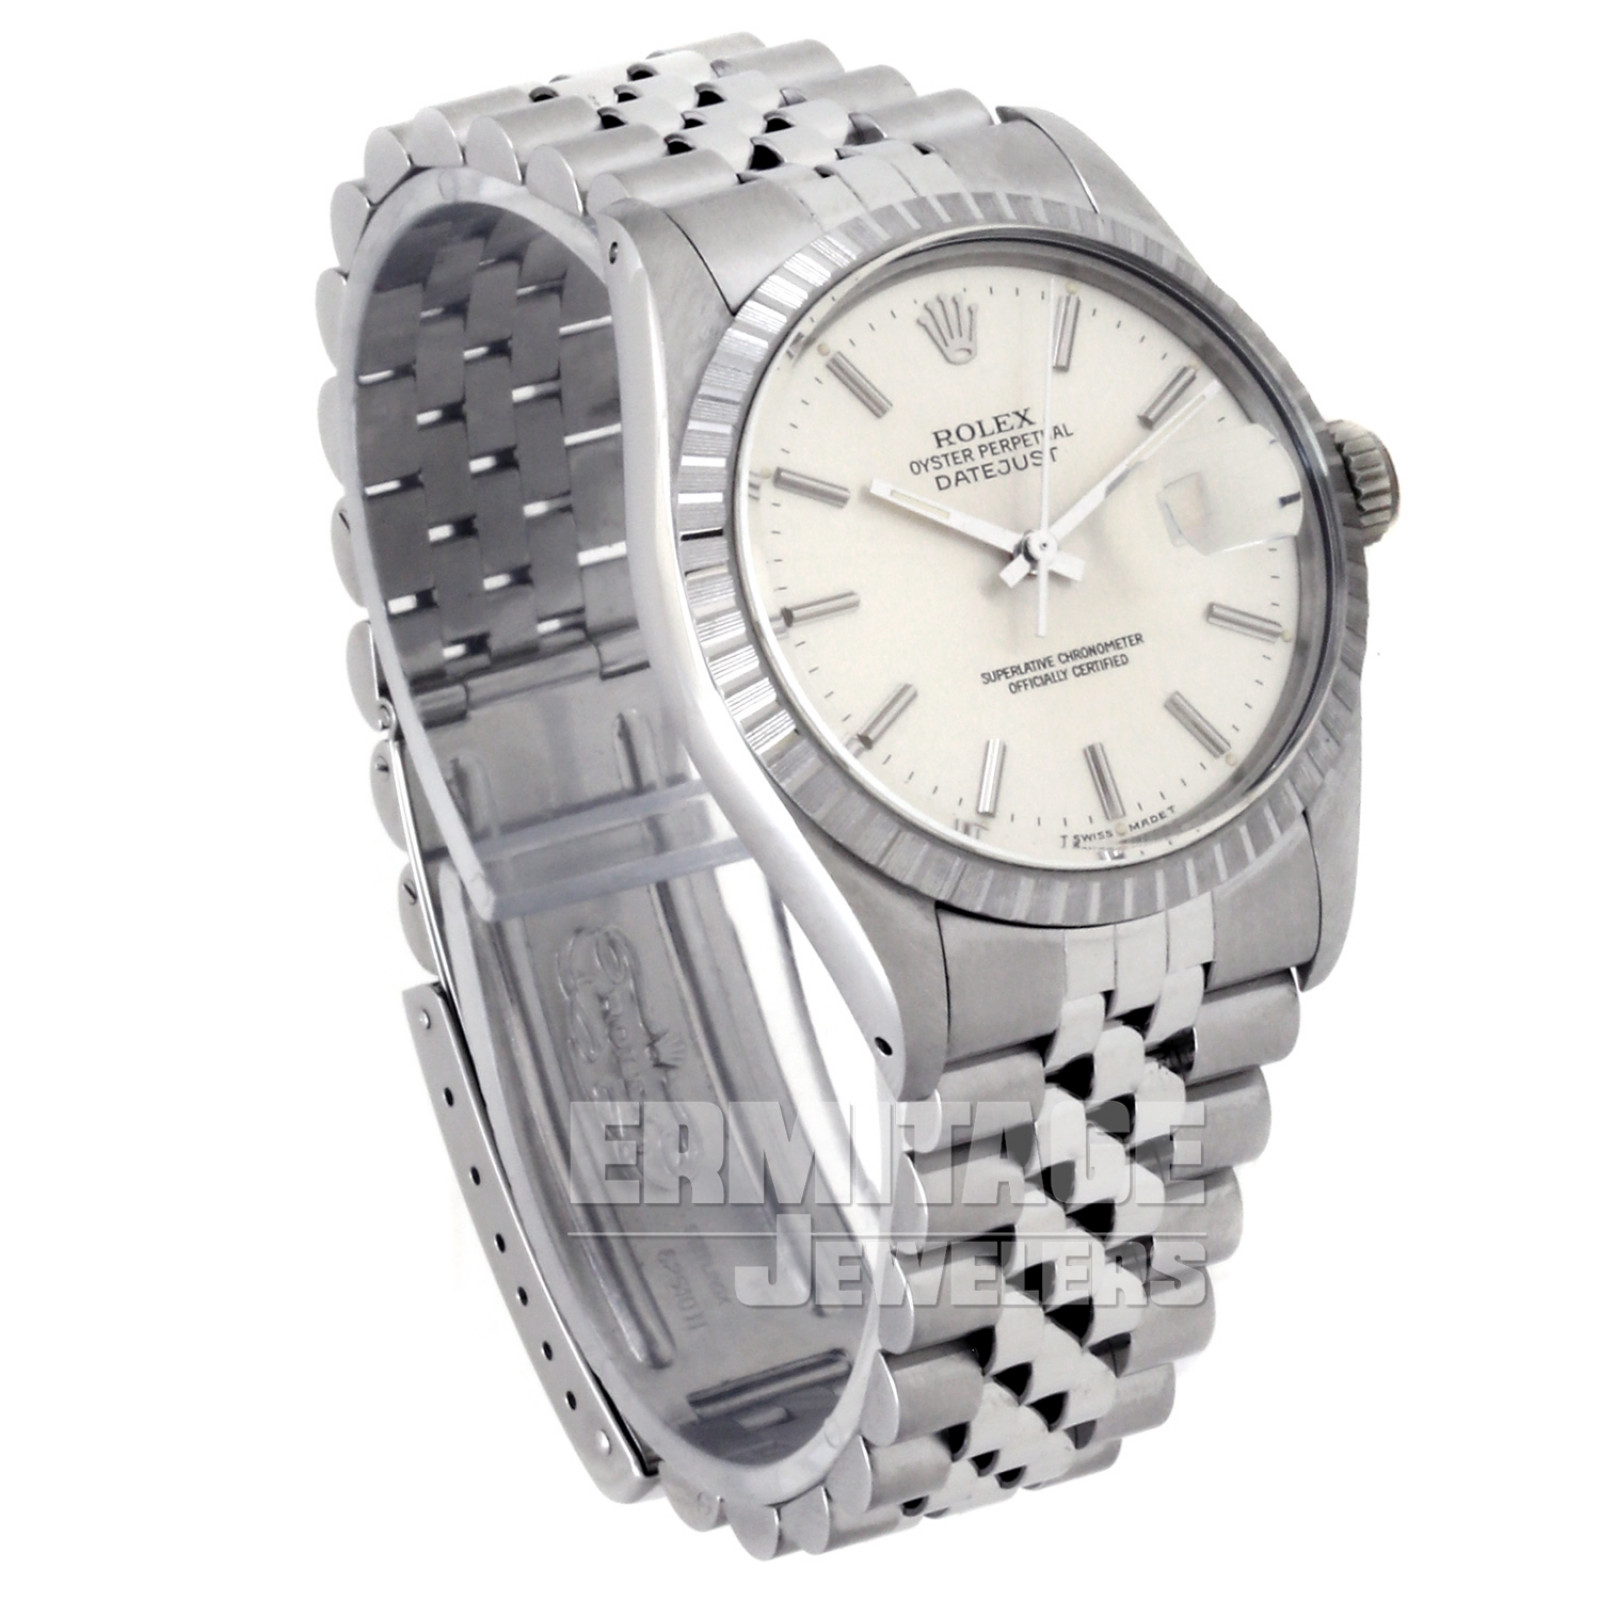 Rolex Datejust 16030 with Steel Dial